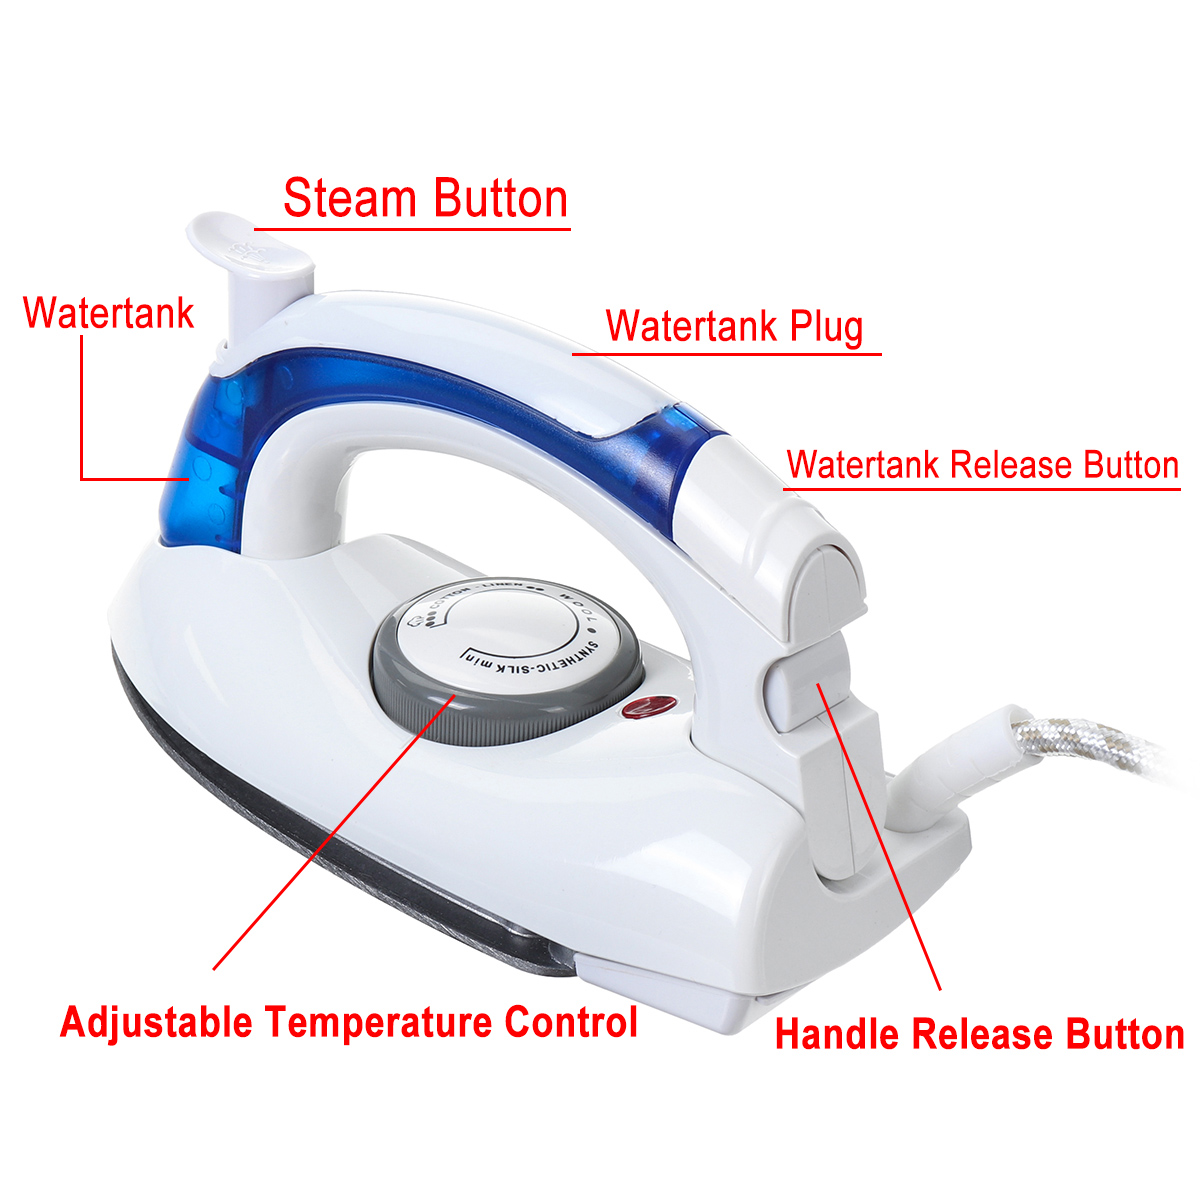 700W-Portable-Handheld-Foldable-Electric-Steam-Iron-3-Gear-Fast-Heat-Up-Garment-Steamer-Wrinkle-Remo-1754049-6